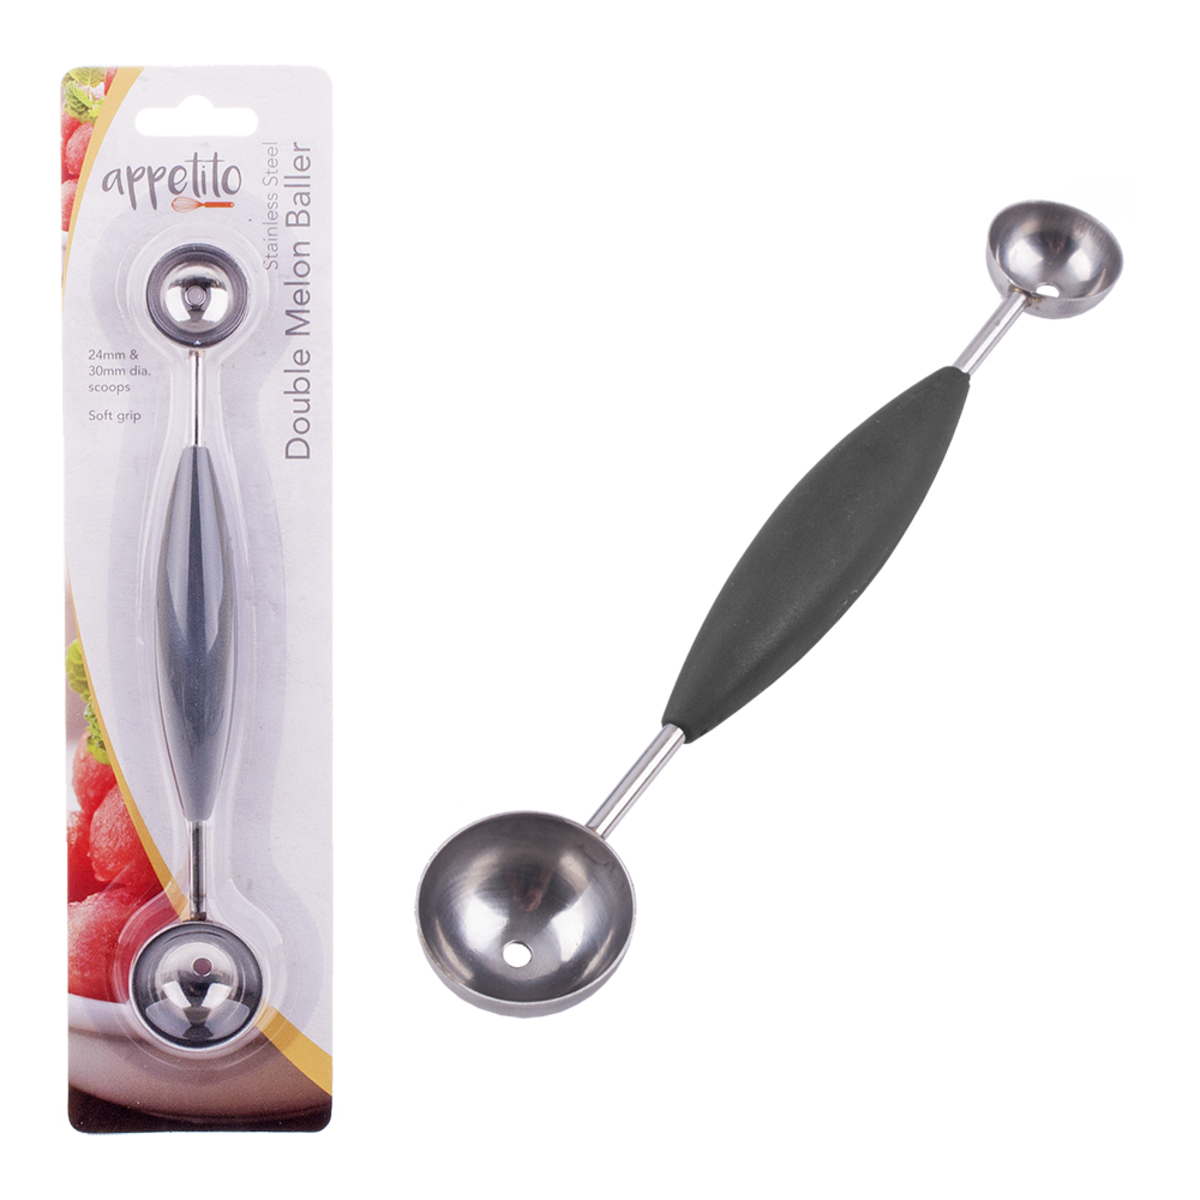 STAINLESS STEEL DOUBLE MELON BALLER W/ SOFT GRIP